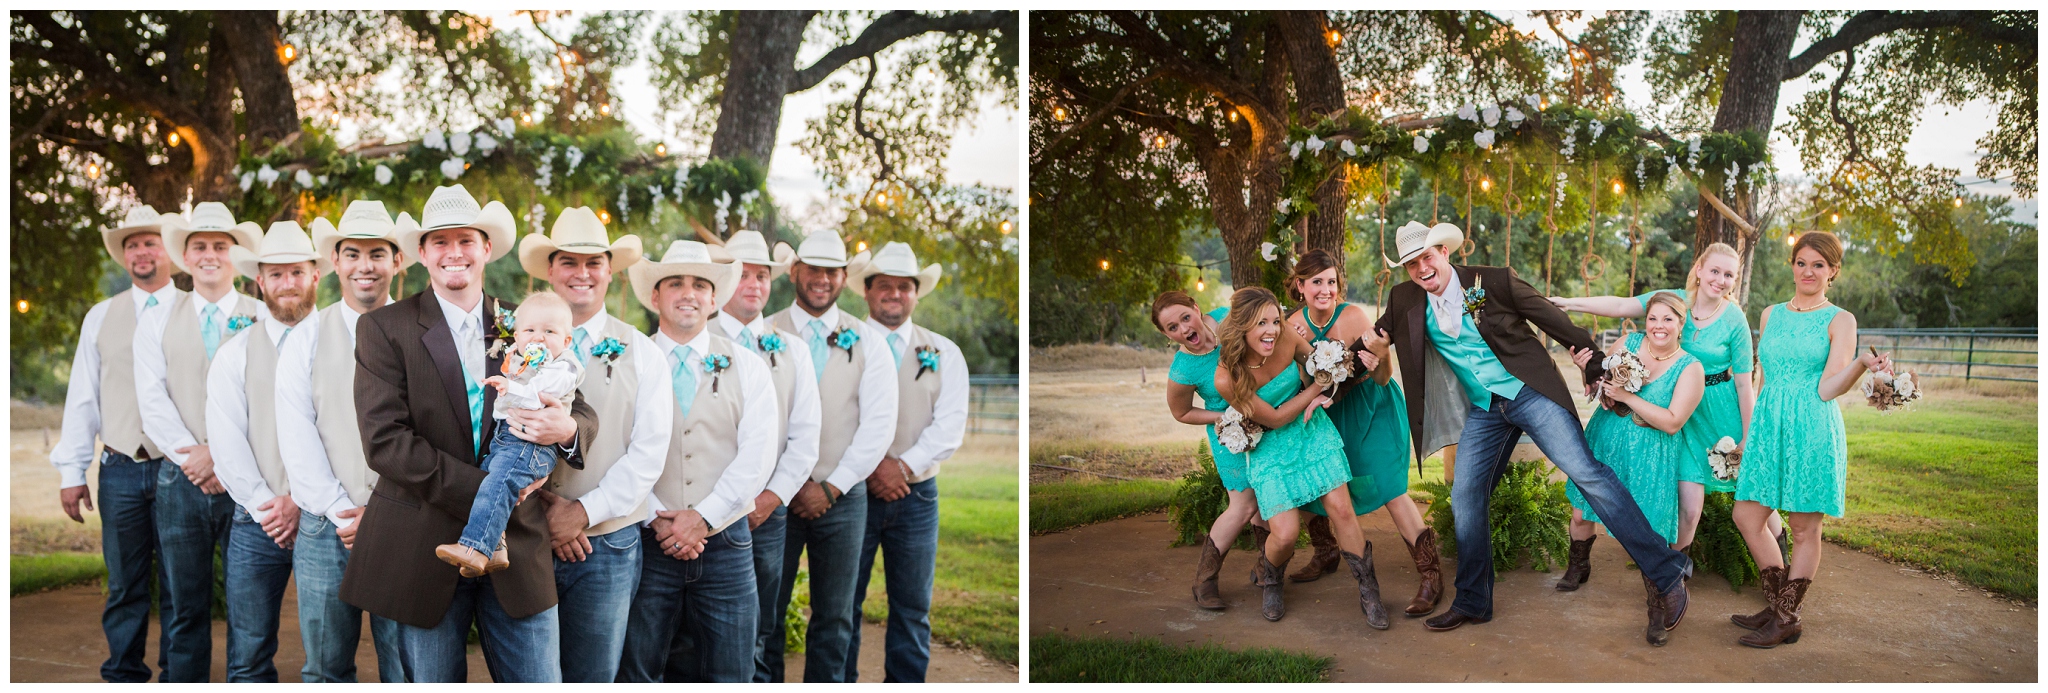 Boerne Wedding Photographer CW Hill Country Ranch Wedding Venue turquoise bronze brown wedding colors Fall Wedding 0073